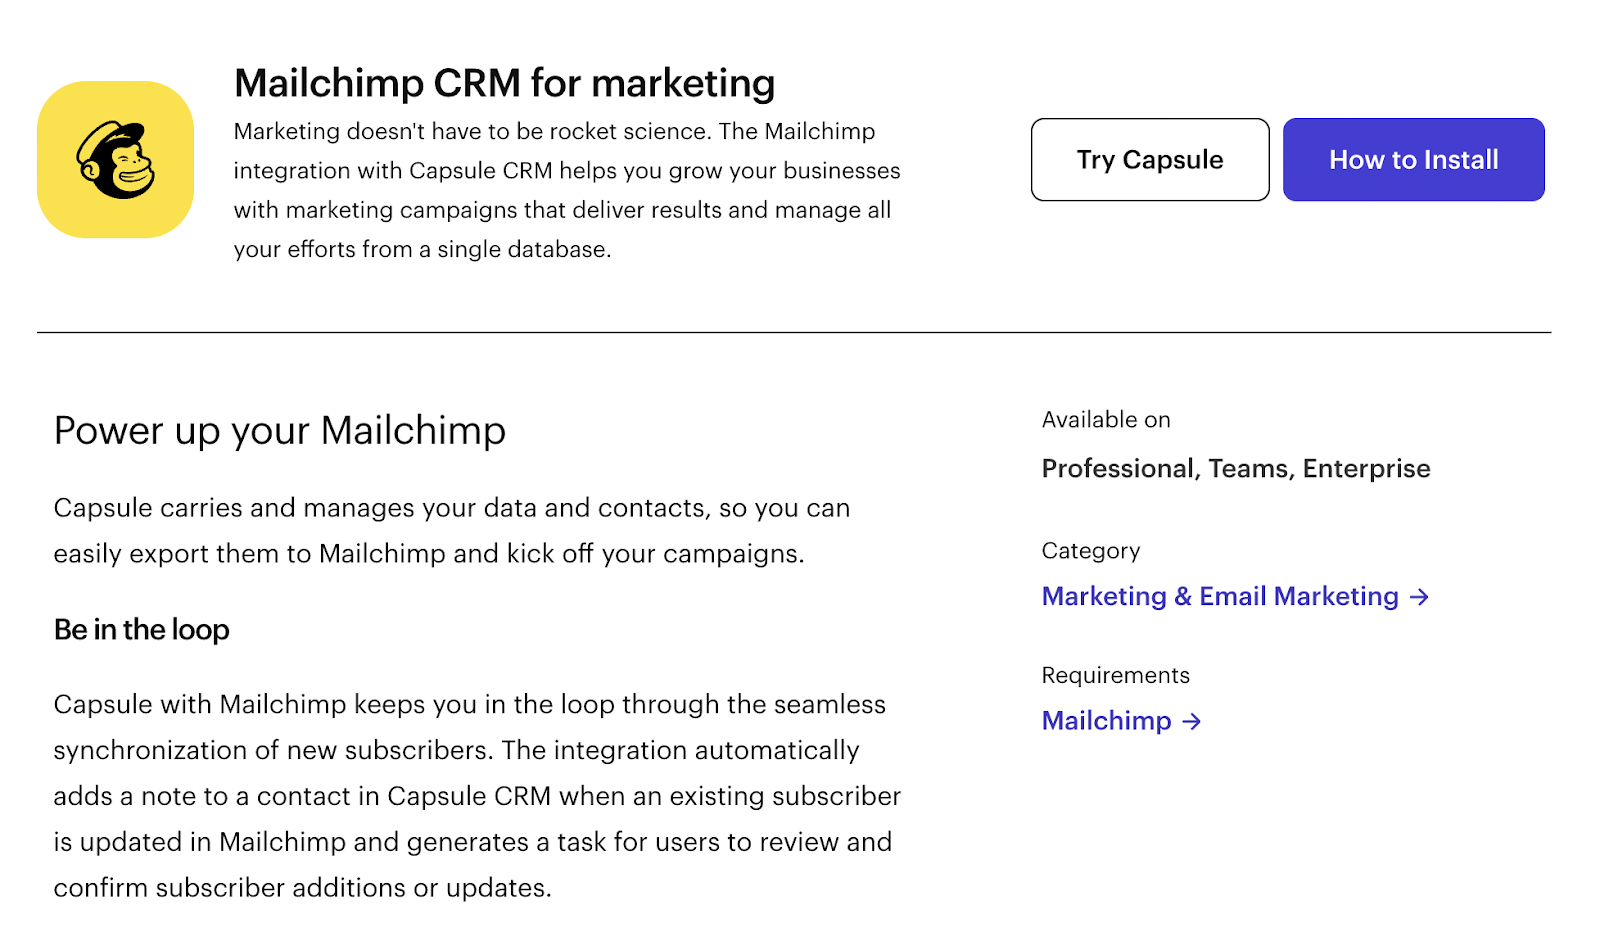 "Mailchimp CRM for marketing" install page